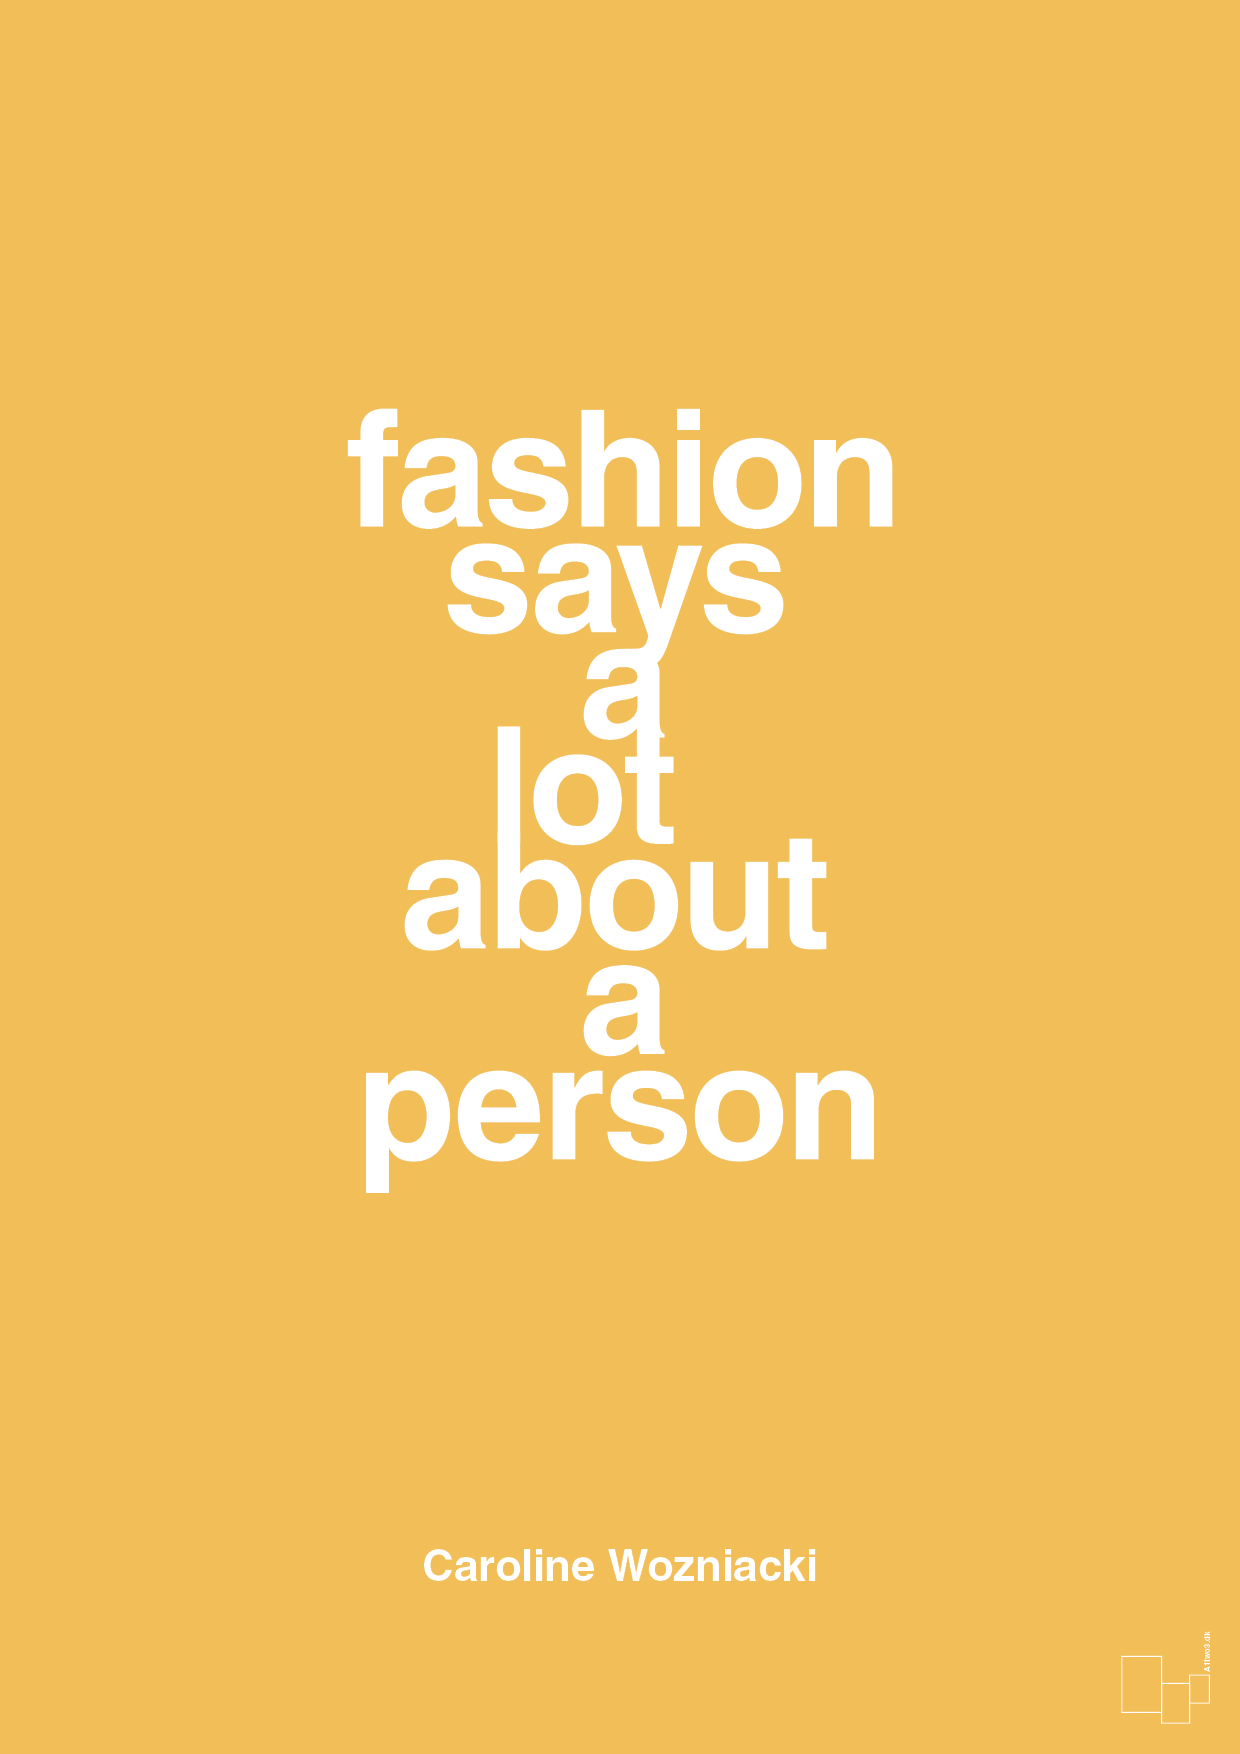 fashion says a lot about a person - Plakat med Citater i Honeycomb